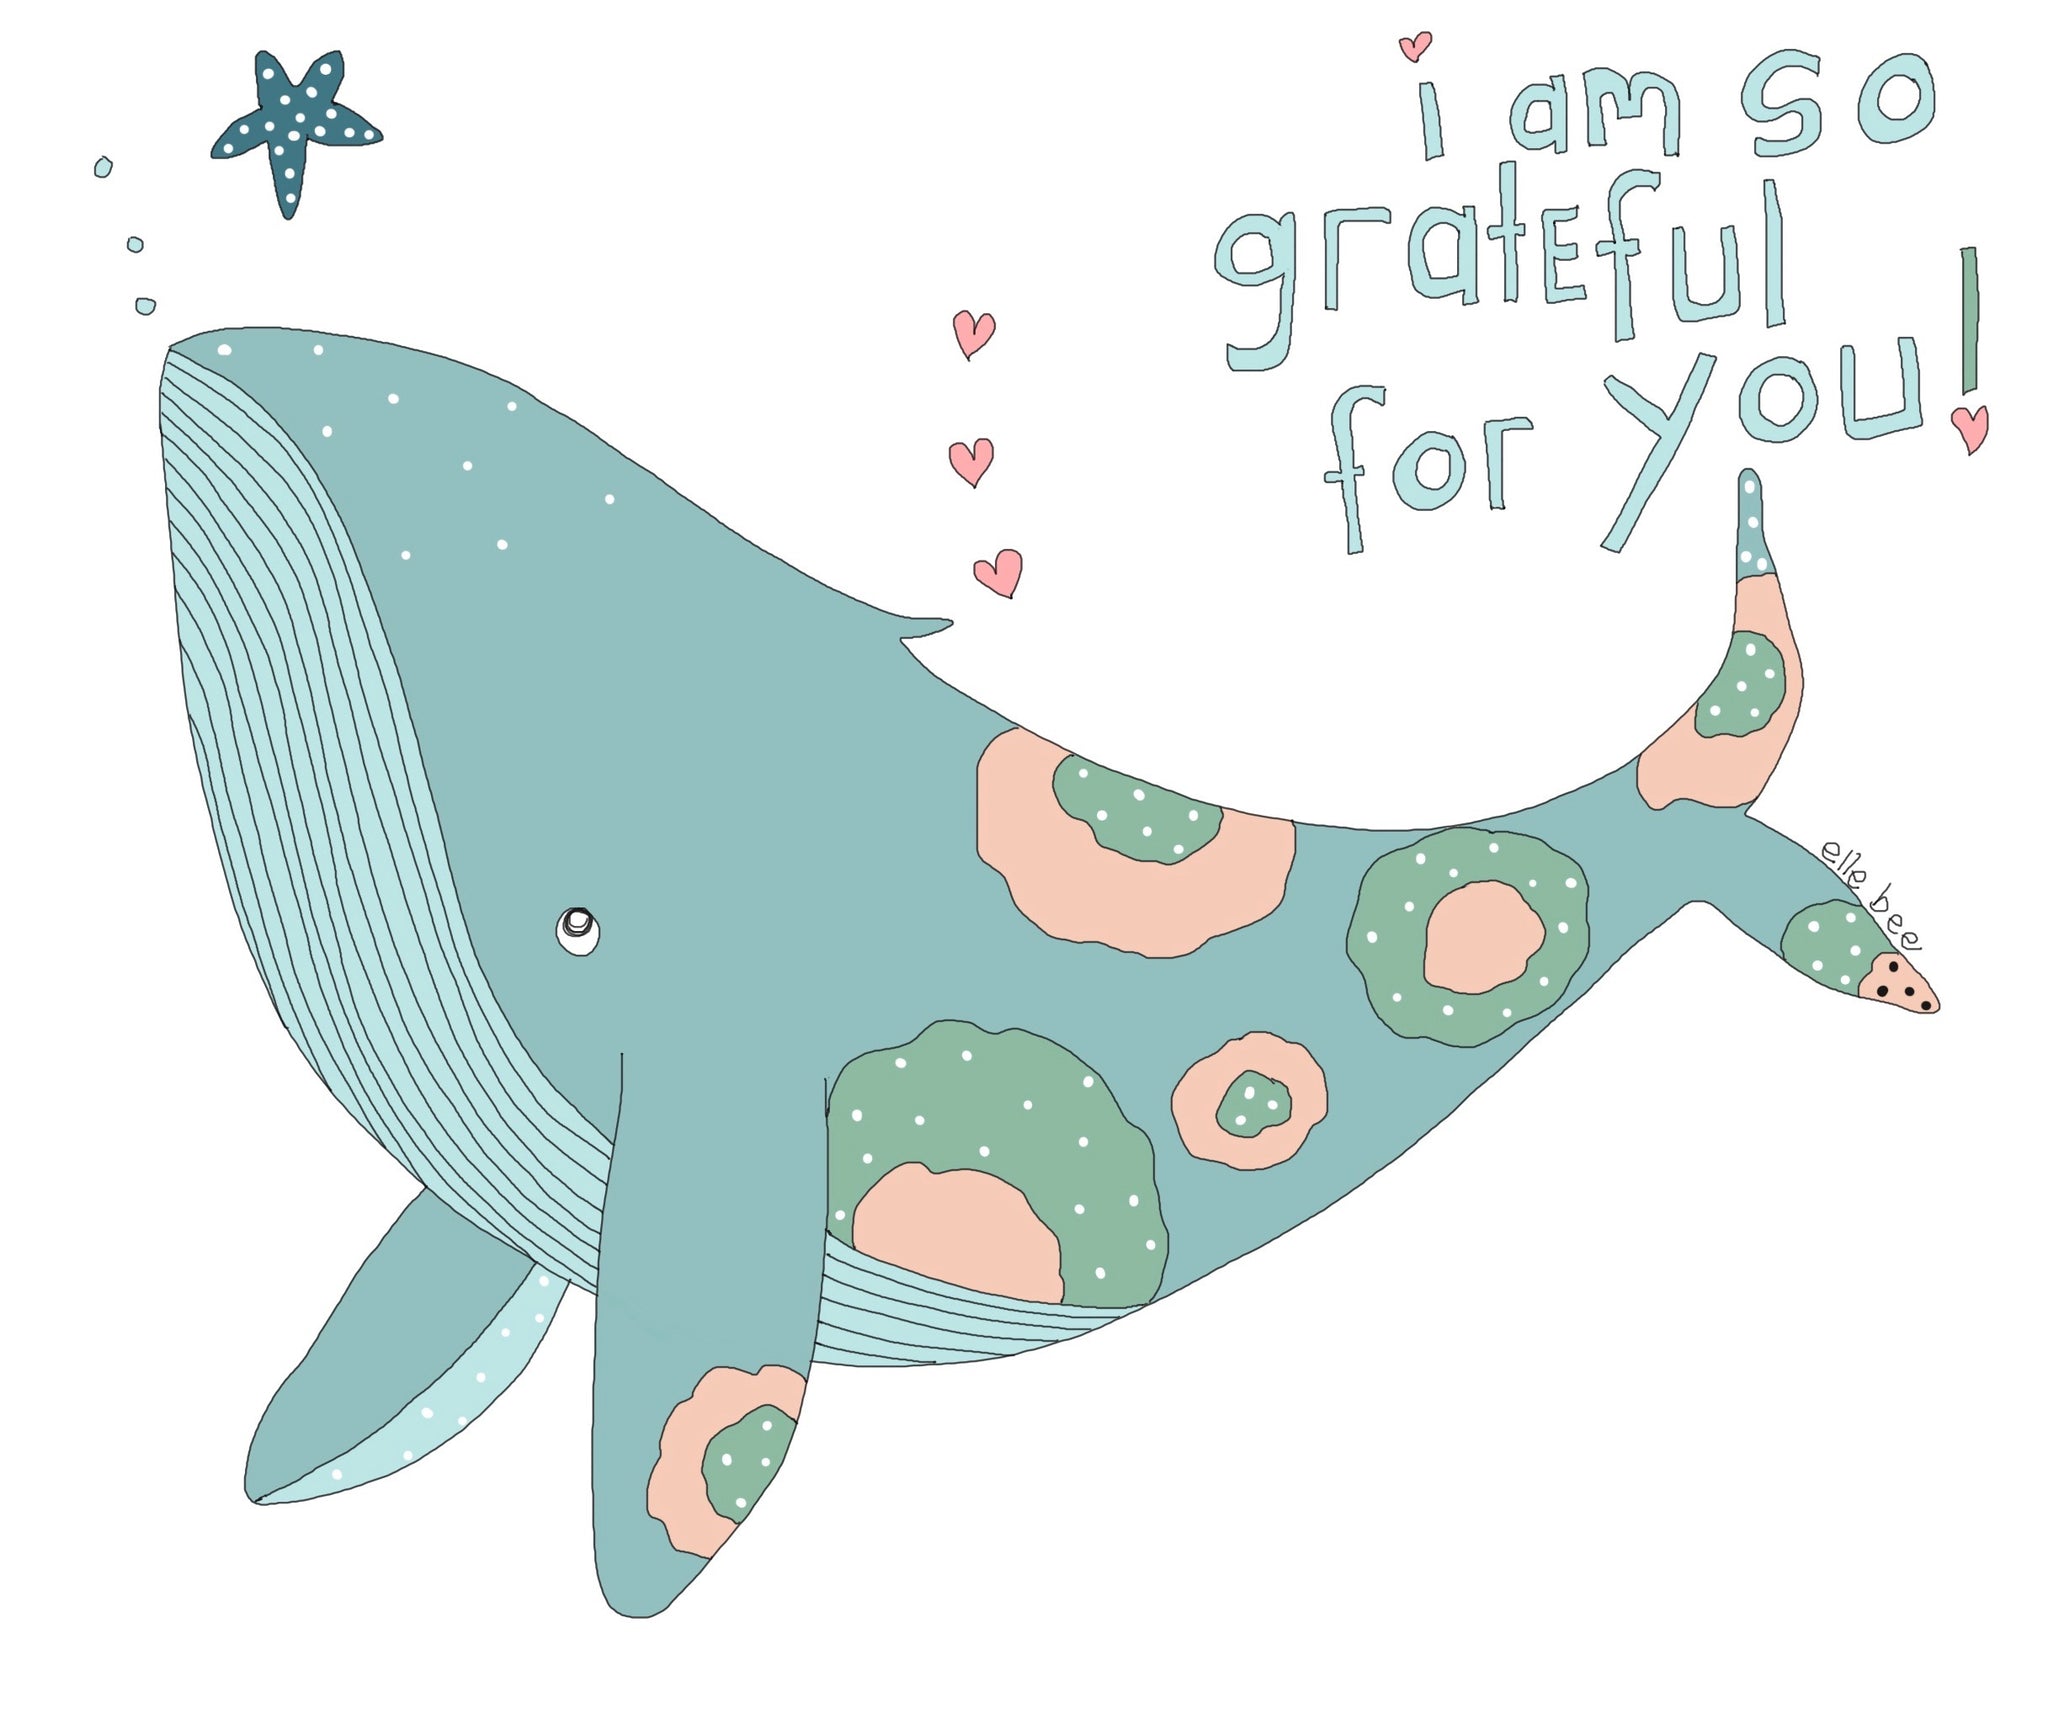 Greeting card "I am so grateful for you"